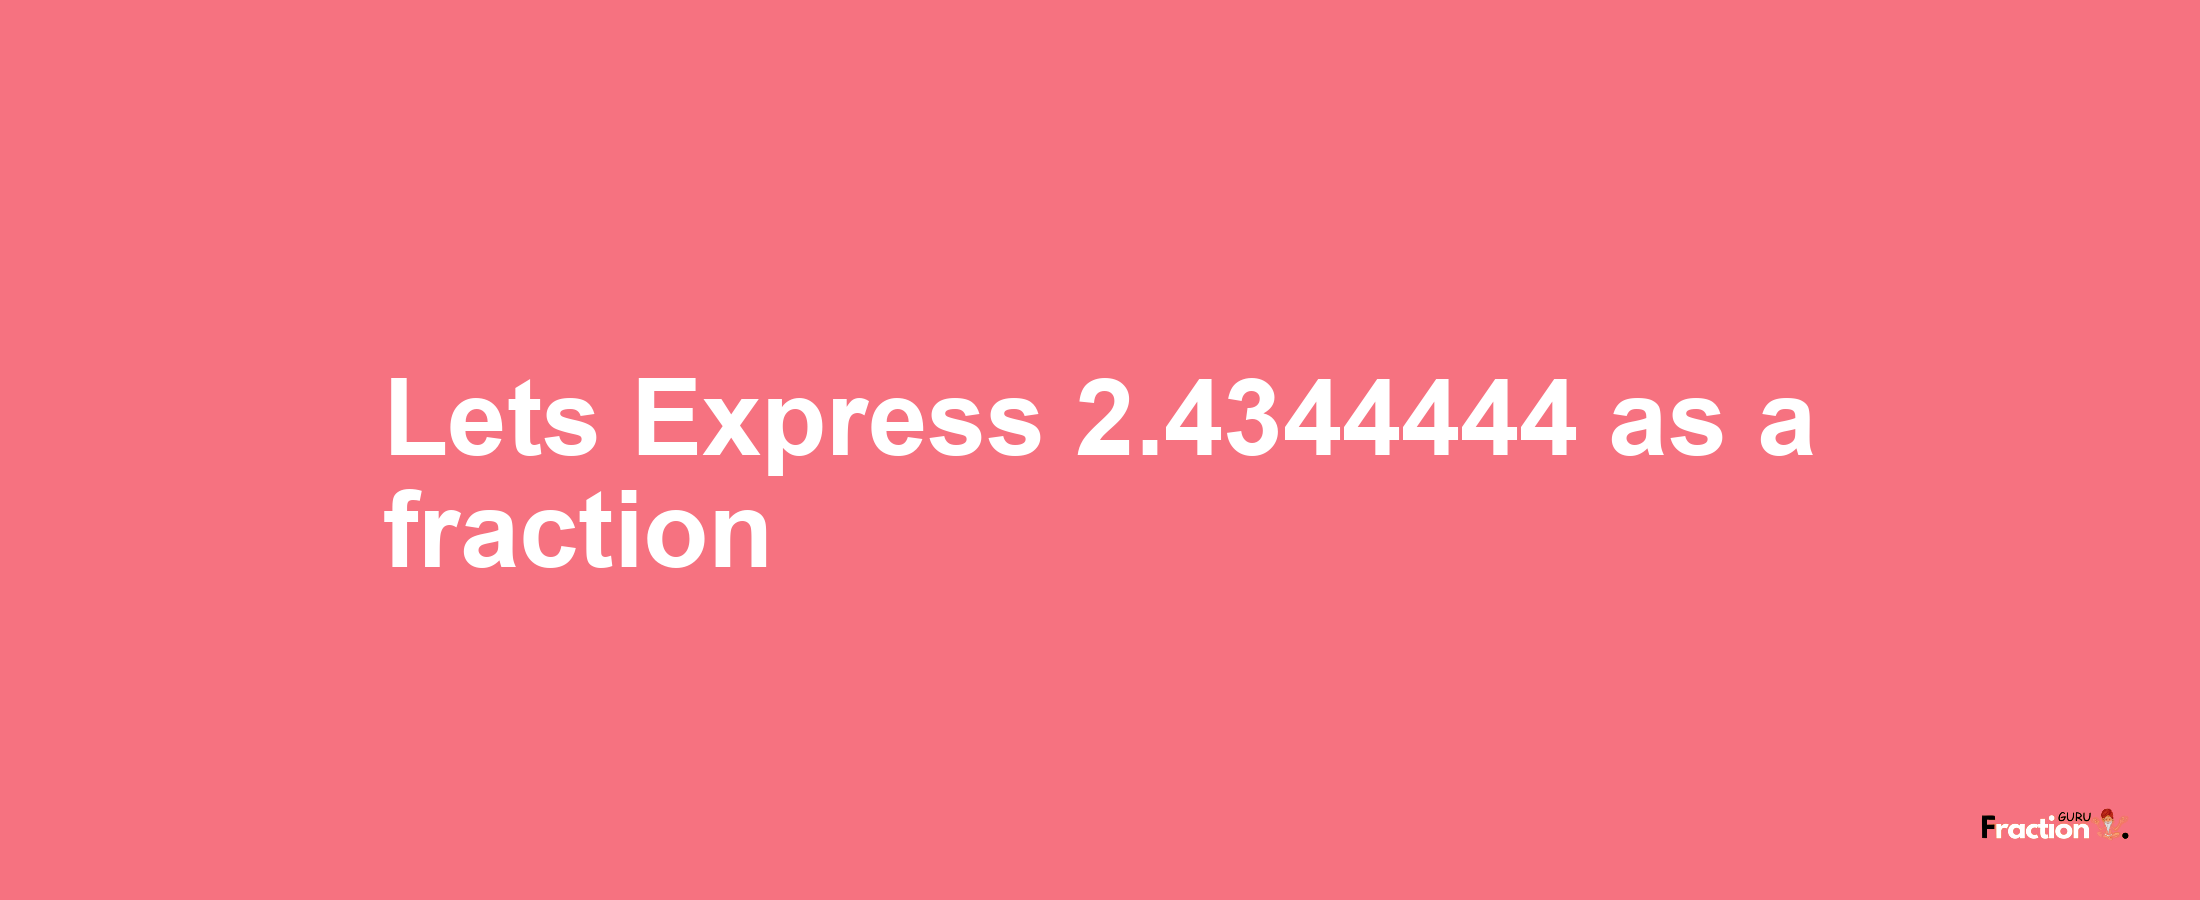 Lets Express 2.4344444 as afraction